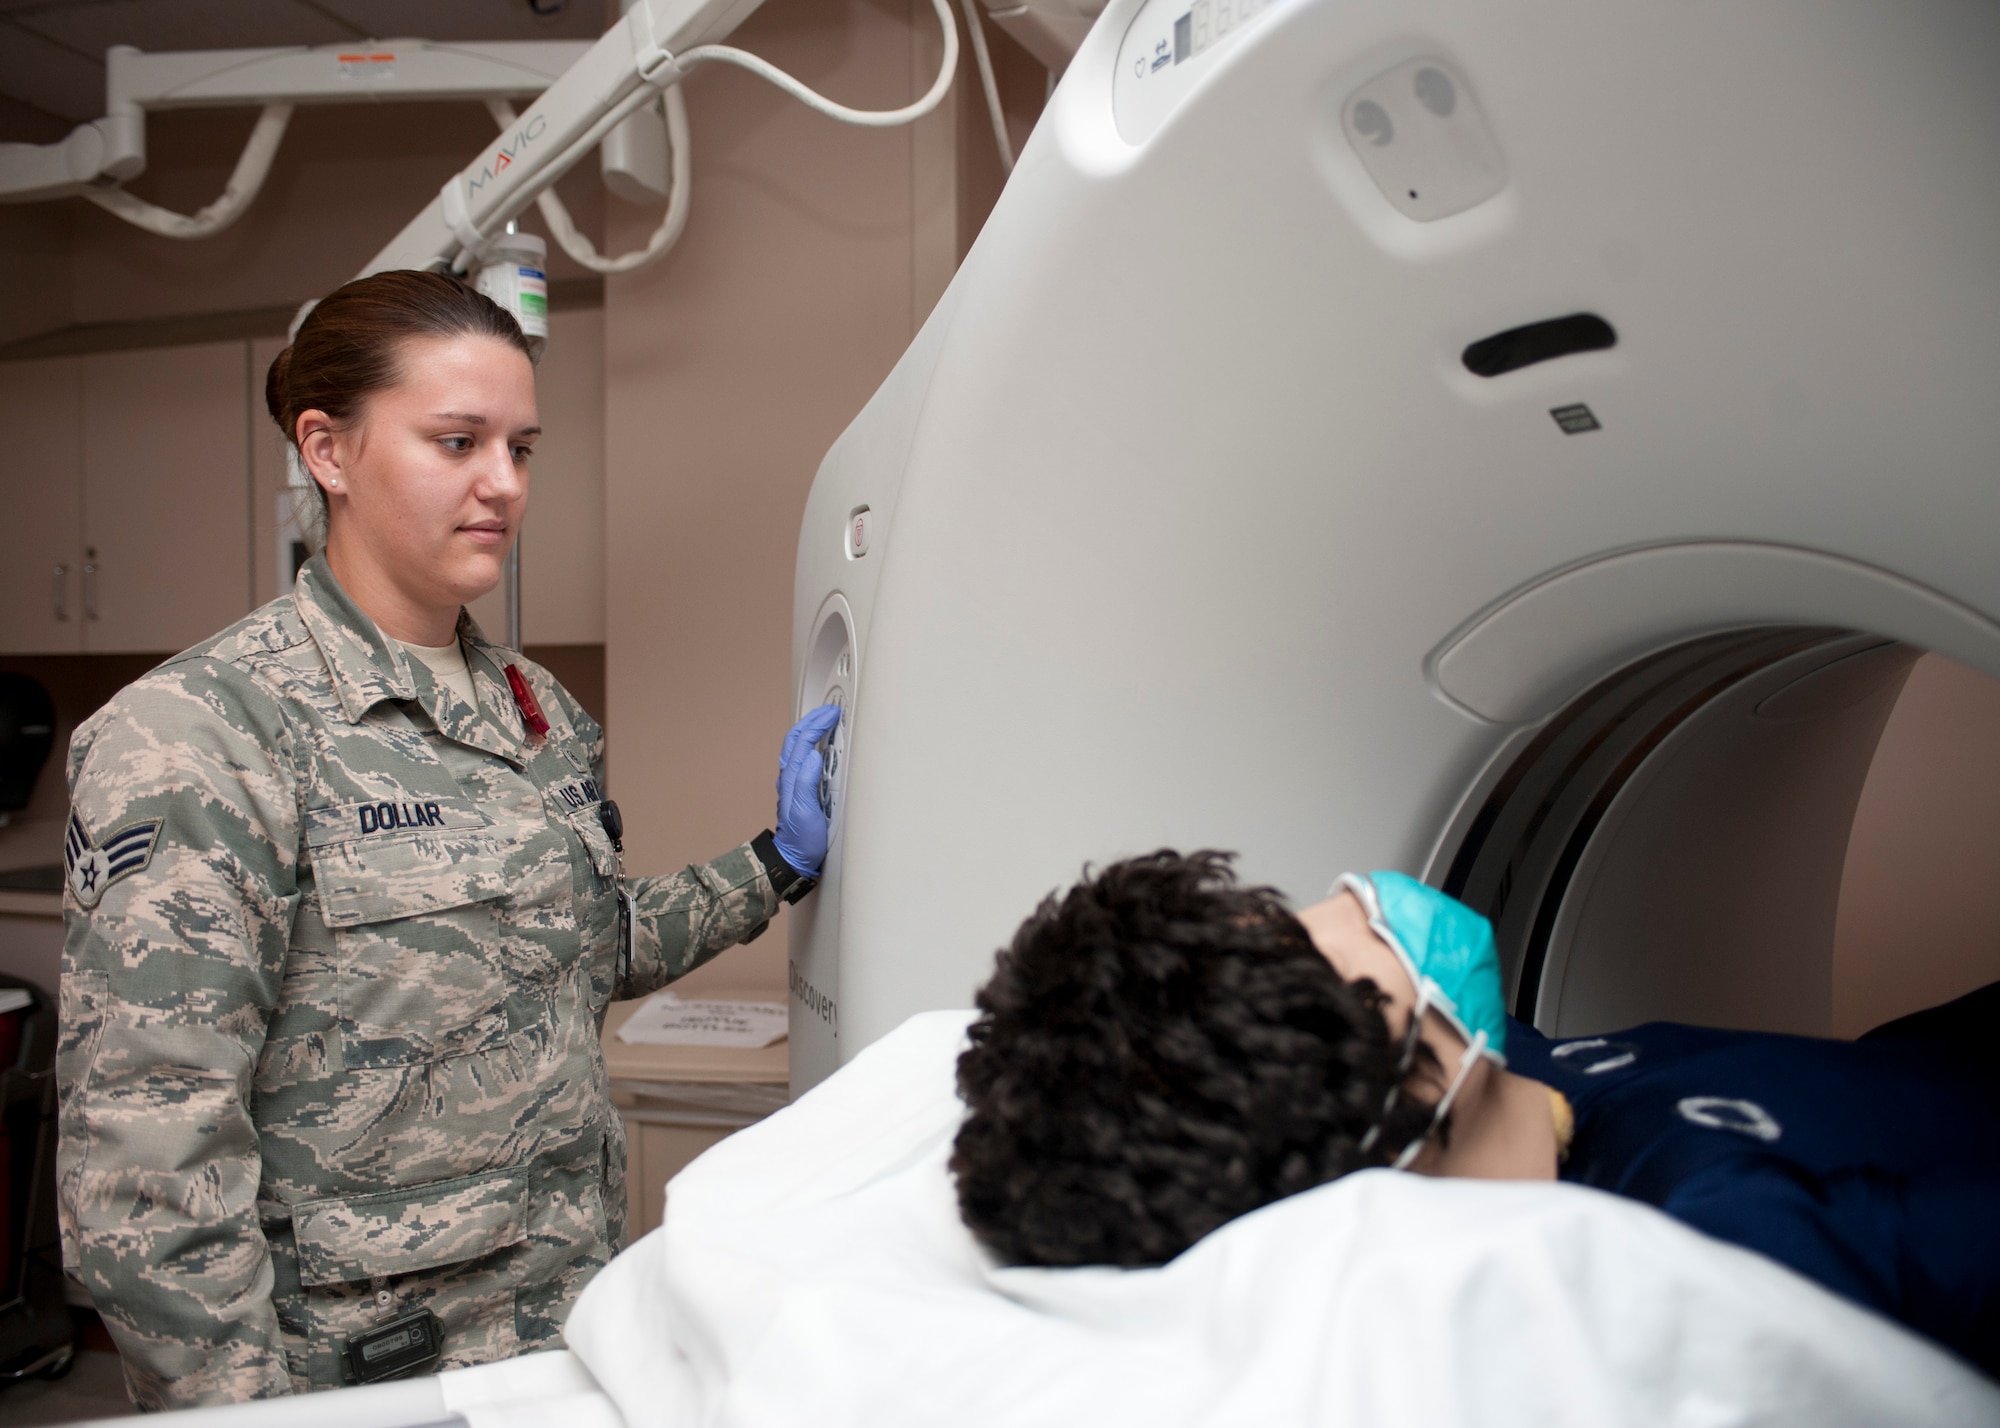 Senior Airman Alyssa Dollar, 99th Medical Surgical Operations Squadron computed tomography technician, scans a practice dummy as part of a CT scan at Nellis Air Force Base, Nev., May 1, 2015. The Diagnostic Imaging Clinic is divided into seven sections to quickly and efficiently find out what’s happening in a patient’s body. (U.S. Air Force photo by Airman 1st Class Jake Carter)